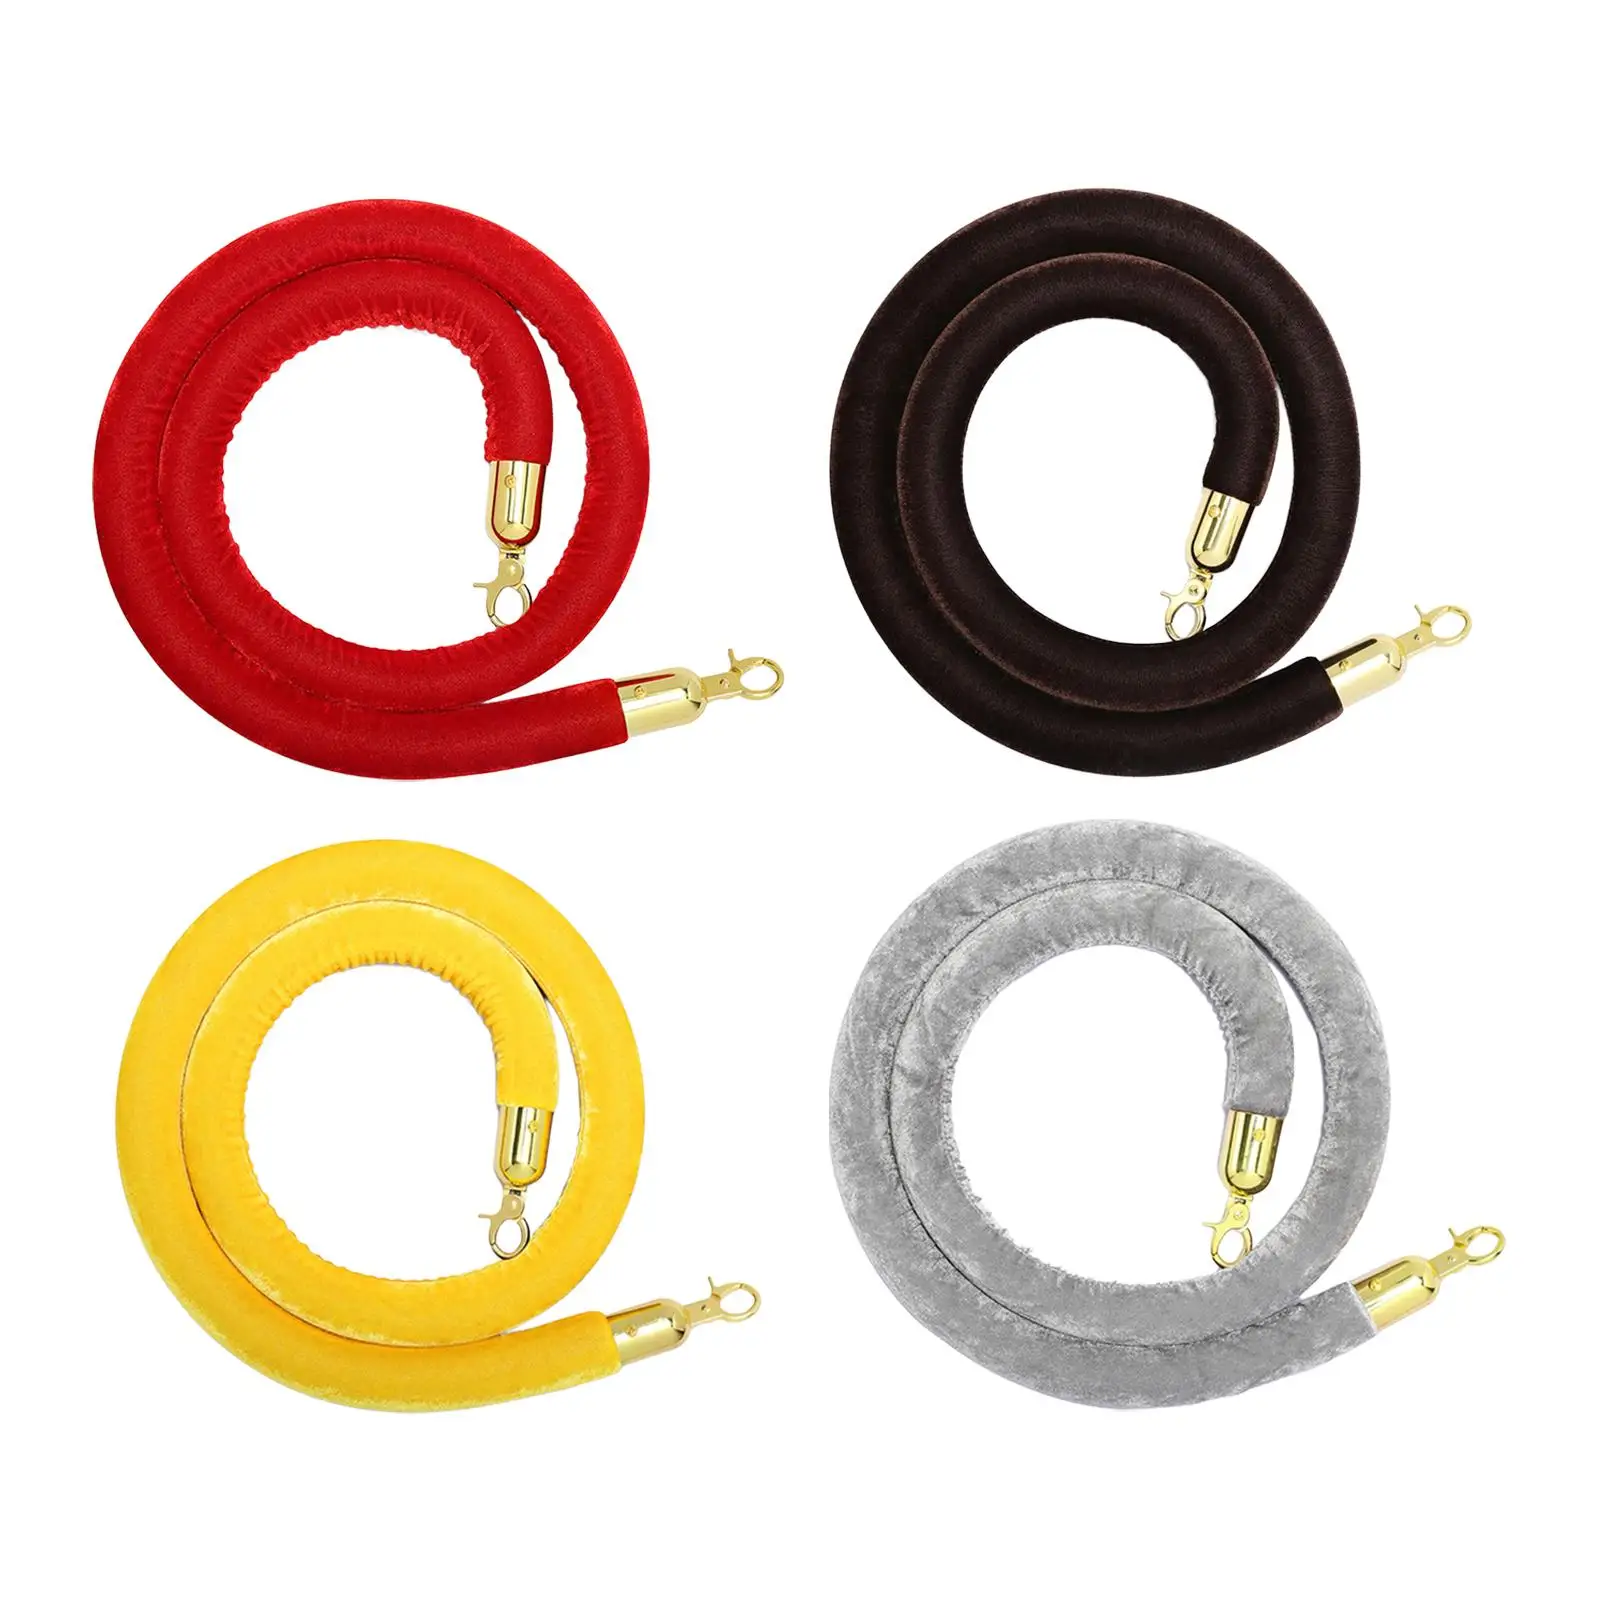 1Pcs Welcome Flannel Rope 1.5M W/ Stainless Steel Hooks Velvet Barrier Rope Stanchion Rope for Exhibition Hospital Queue Divider